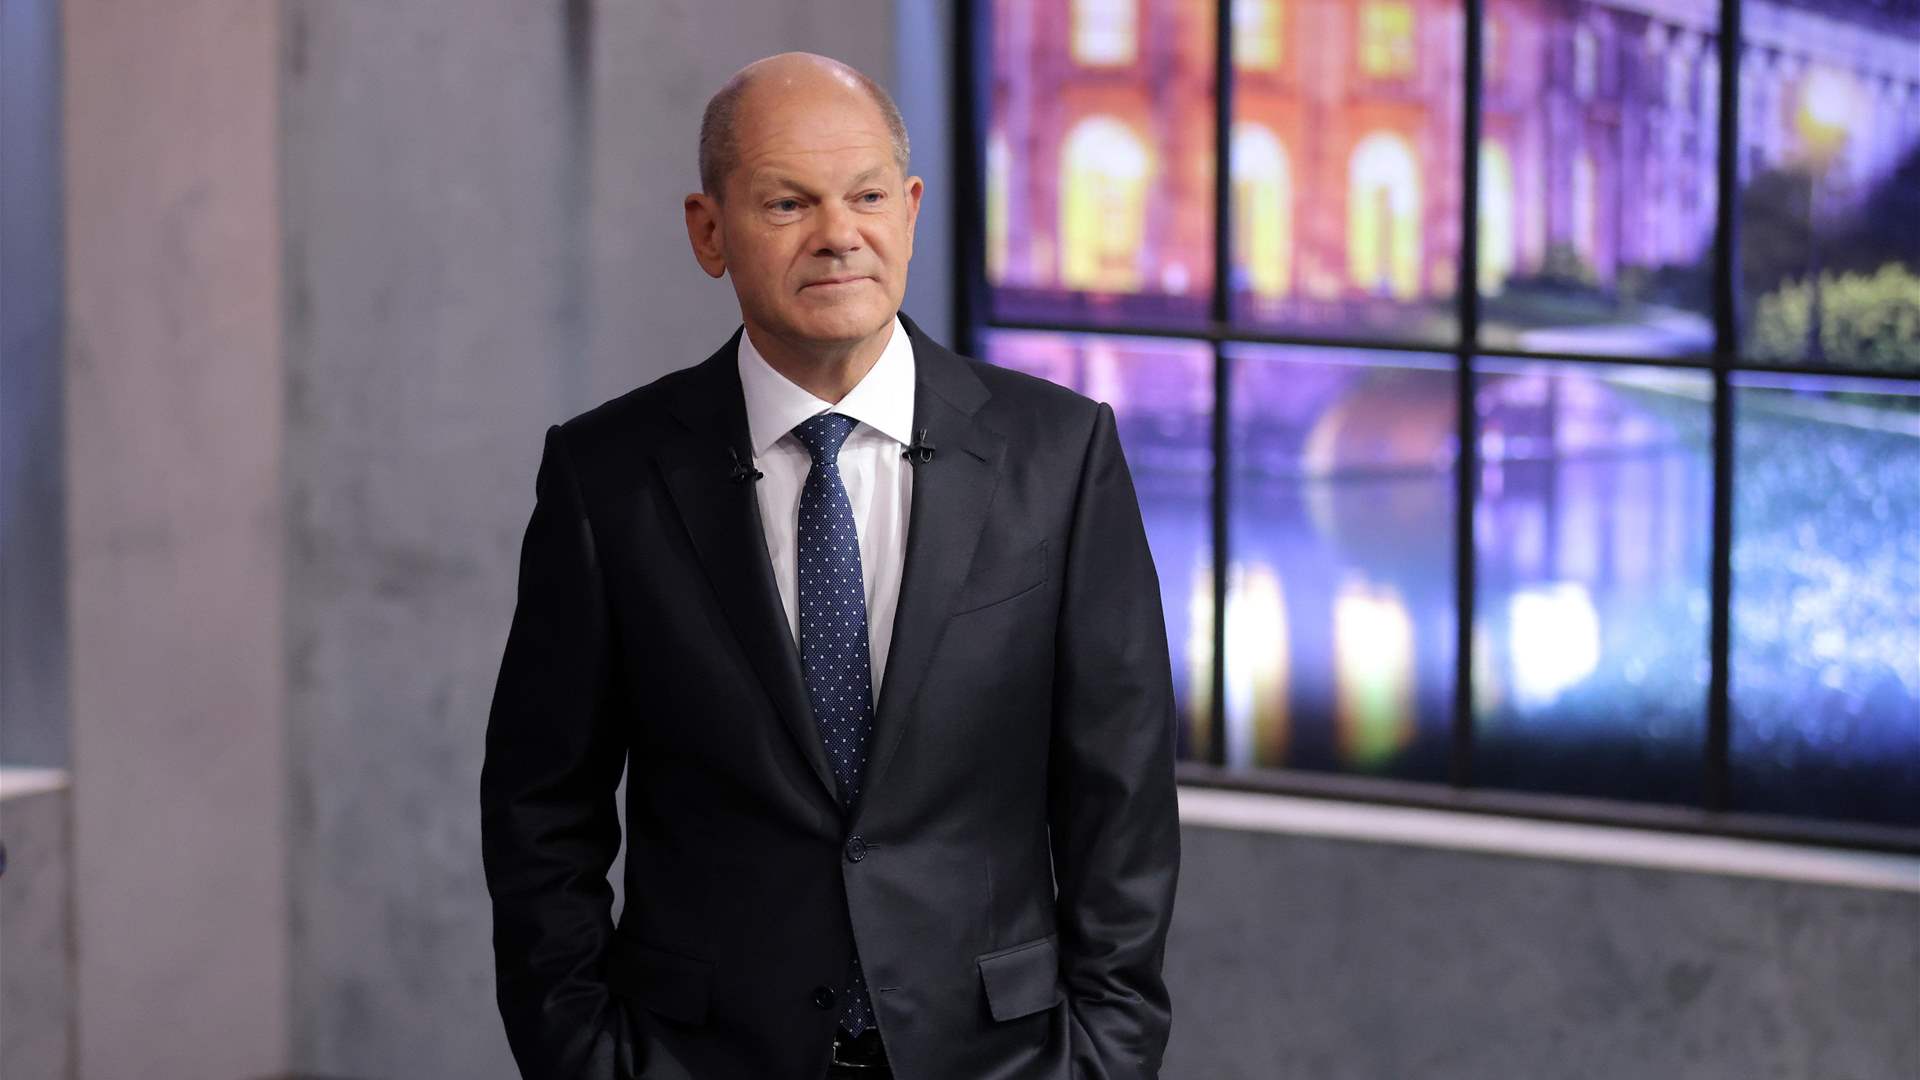 Scholz: Berlin has not made a decision to stop supplying weapons to Israel